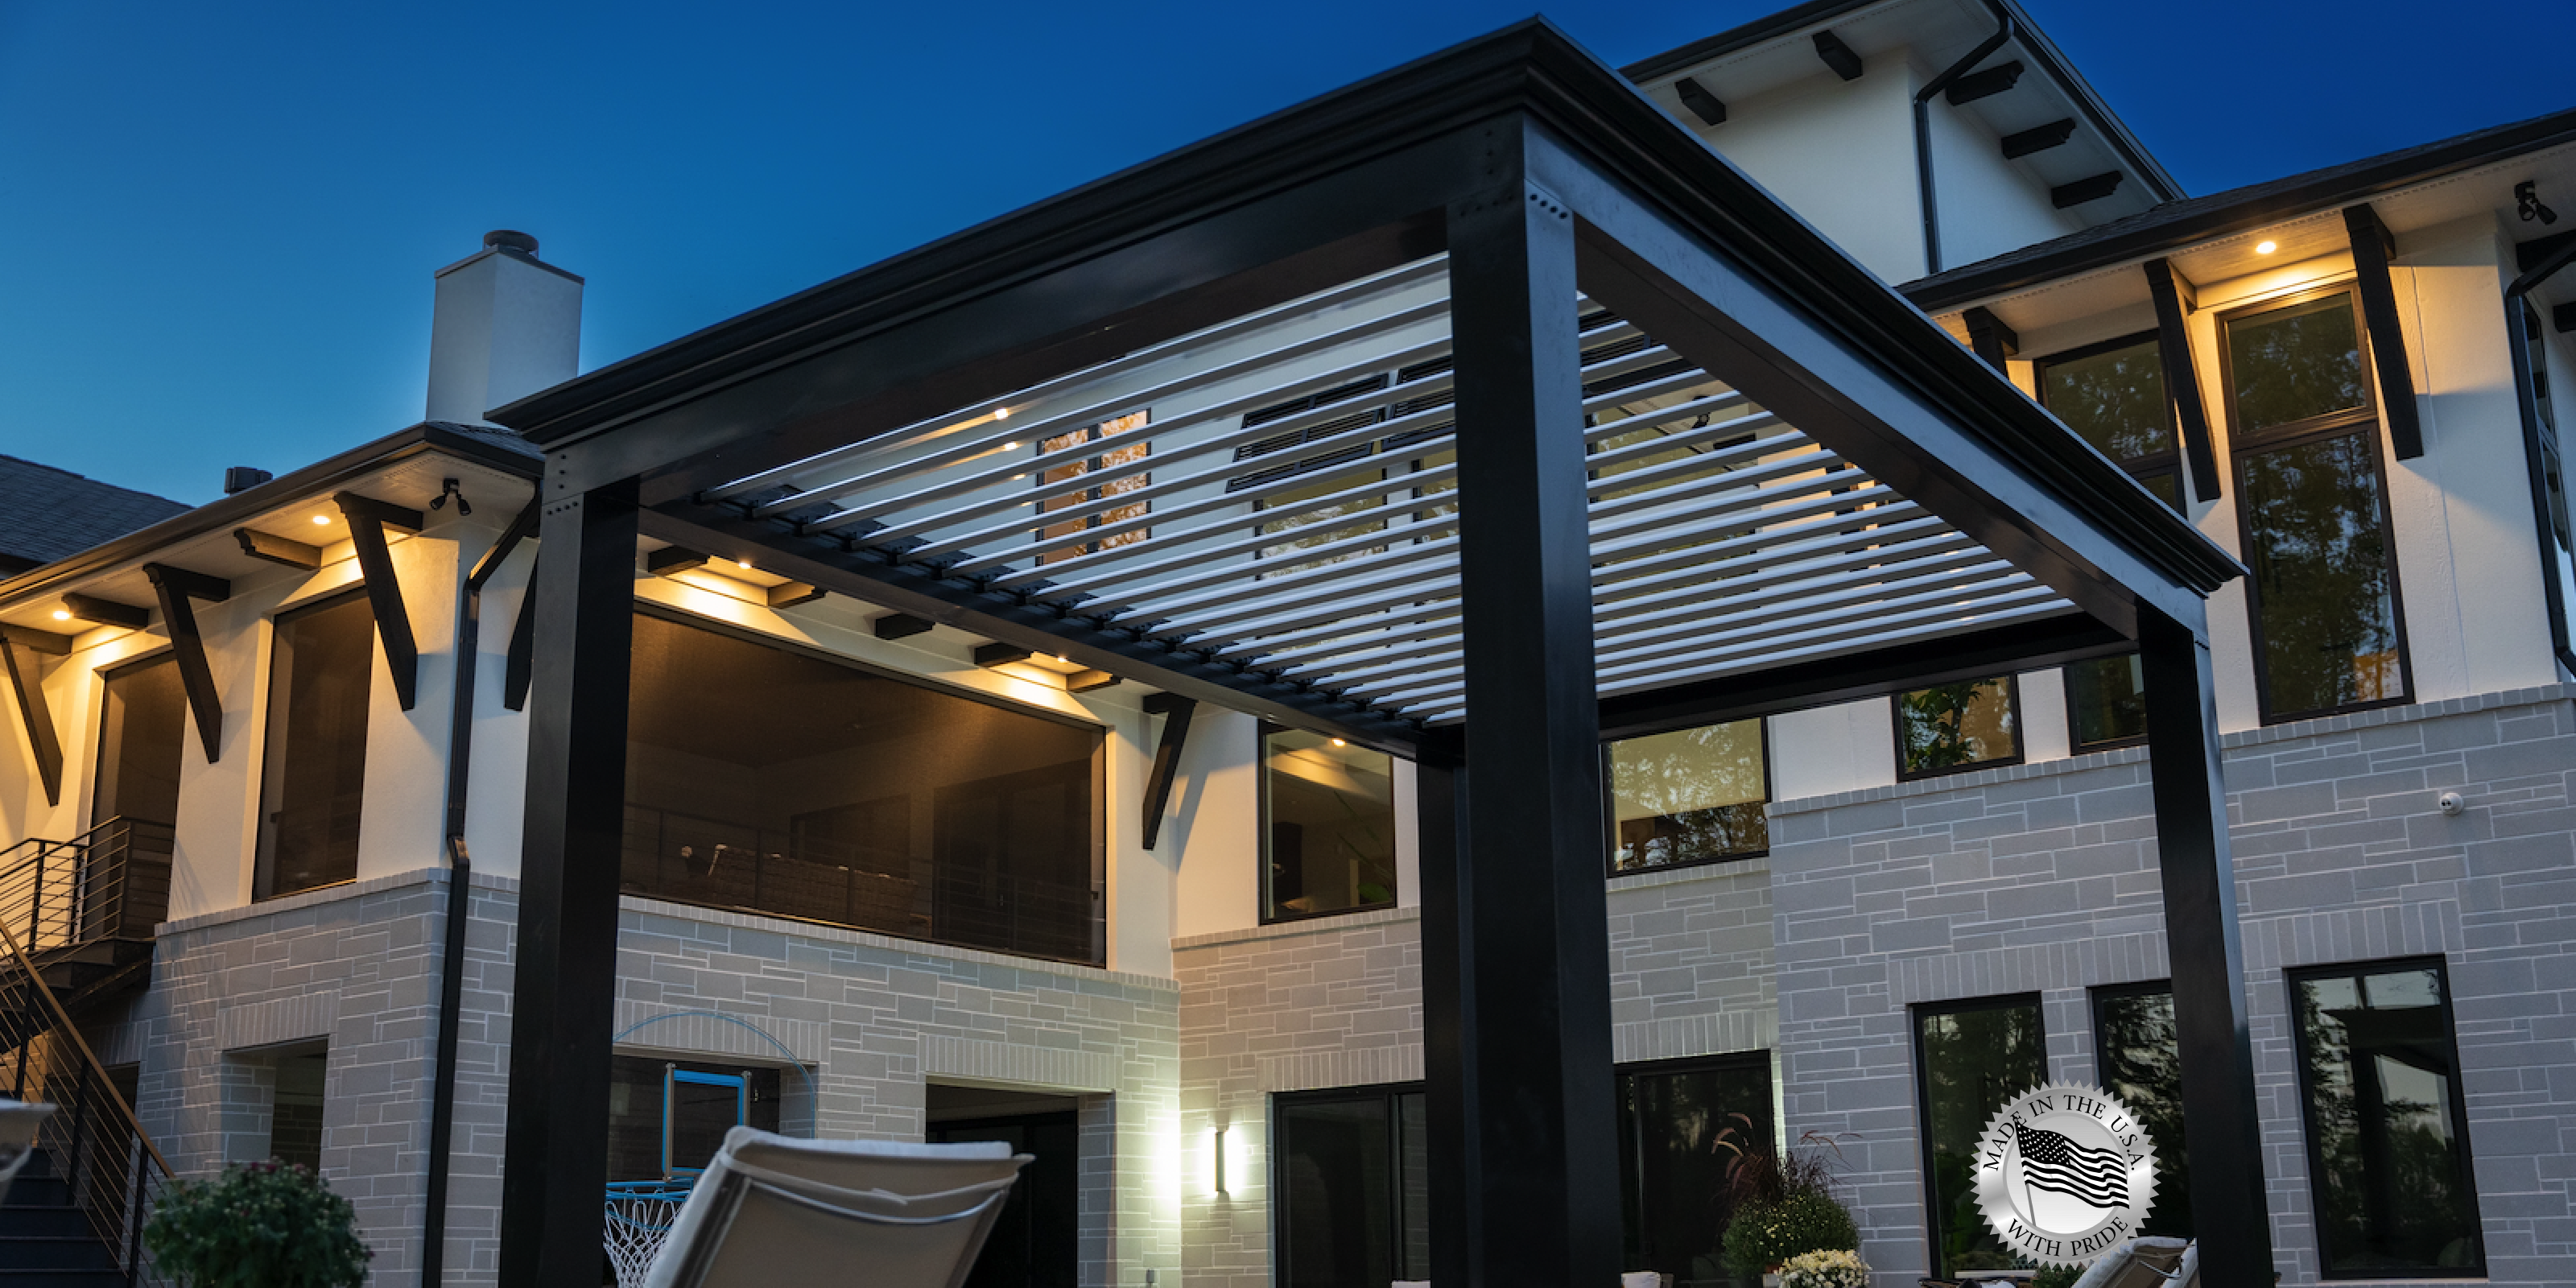 Basic Tools For DIY Project Pergola Provide More Shade